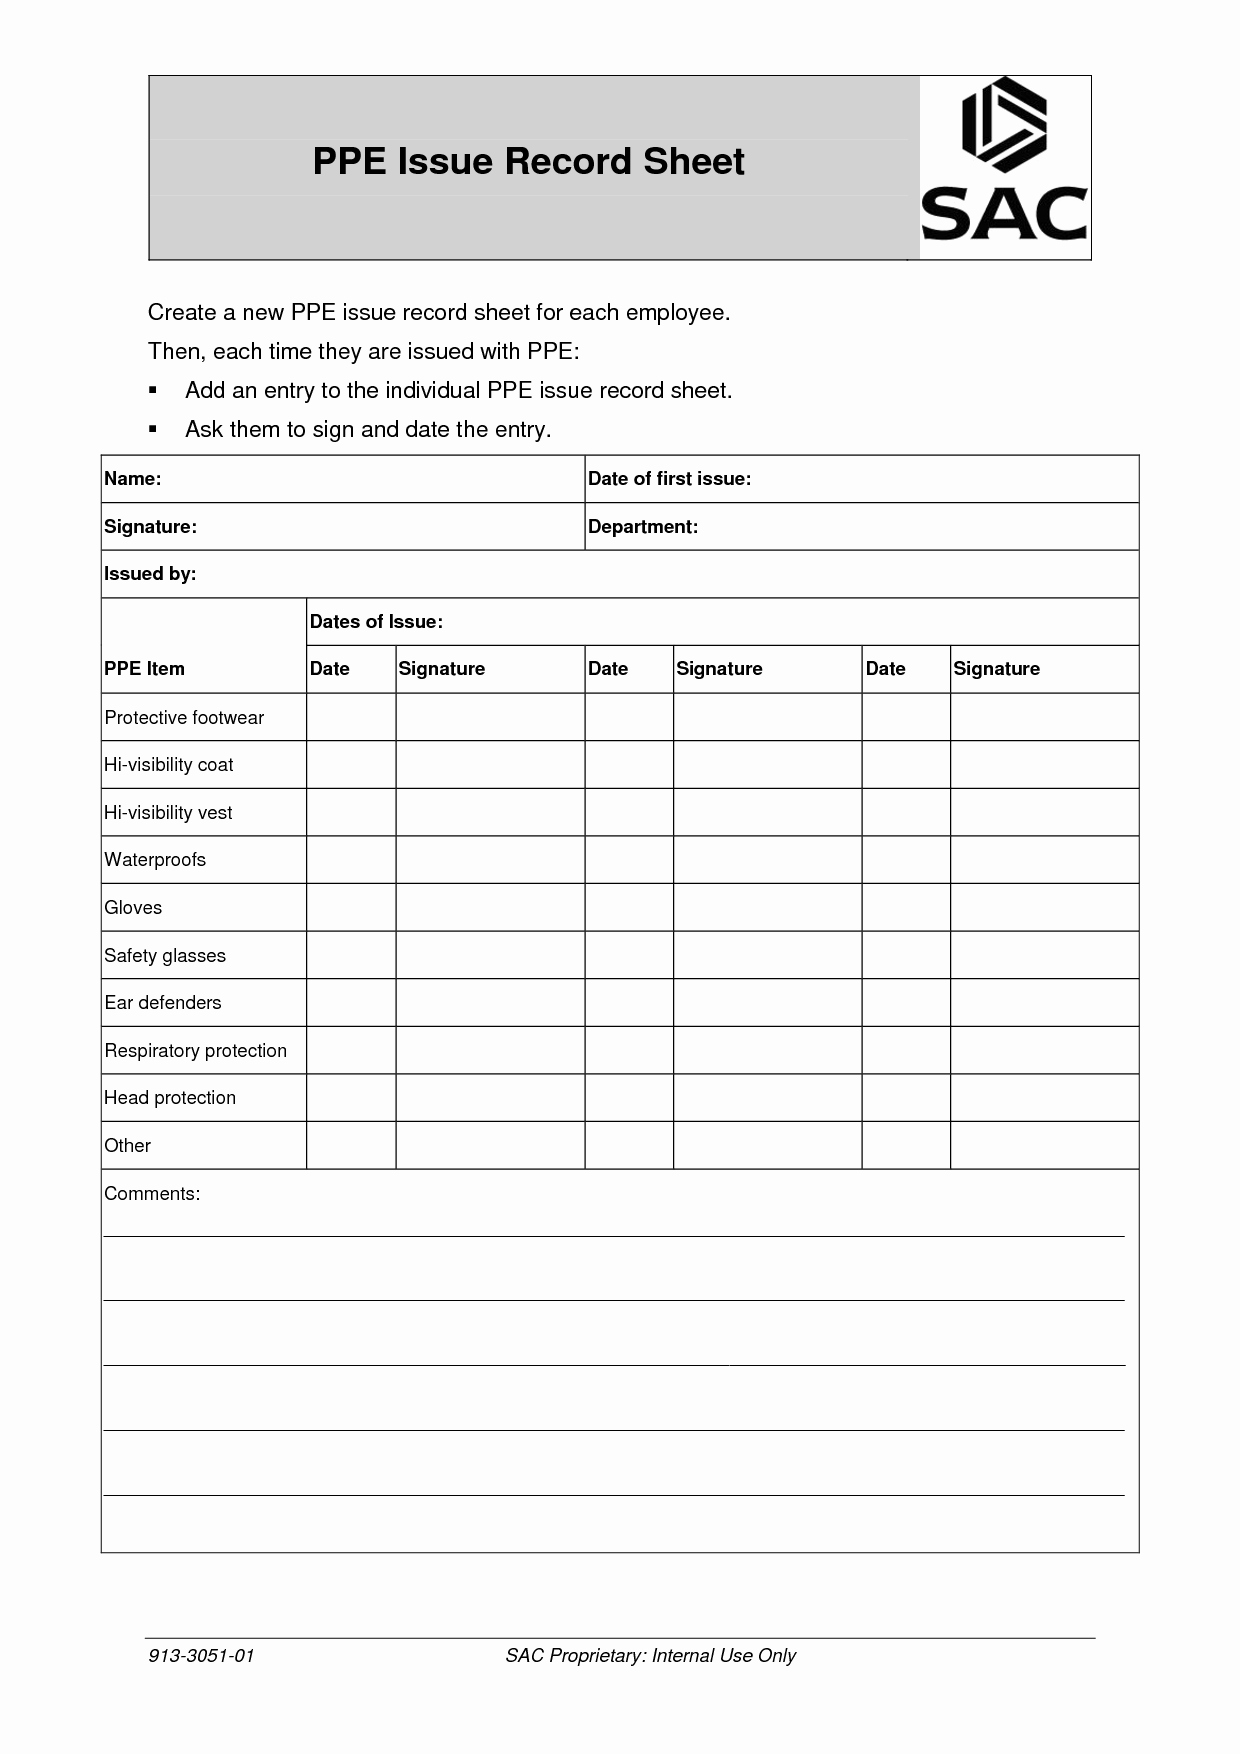 Training Sign Off Sheet Template Unique 25 Of Printable Ppe issue form Template